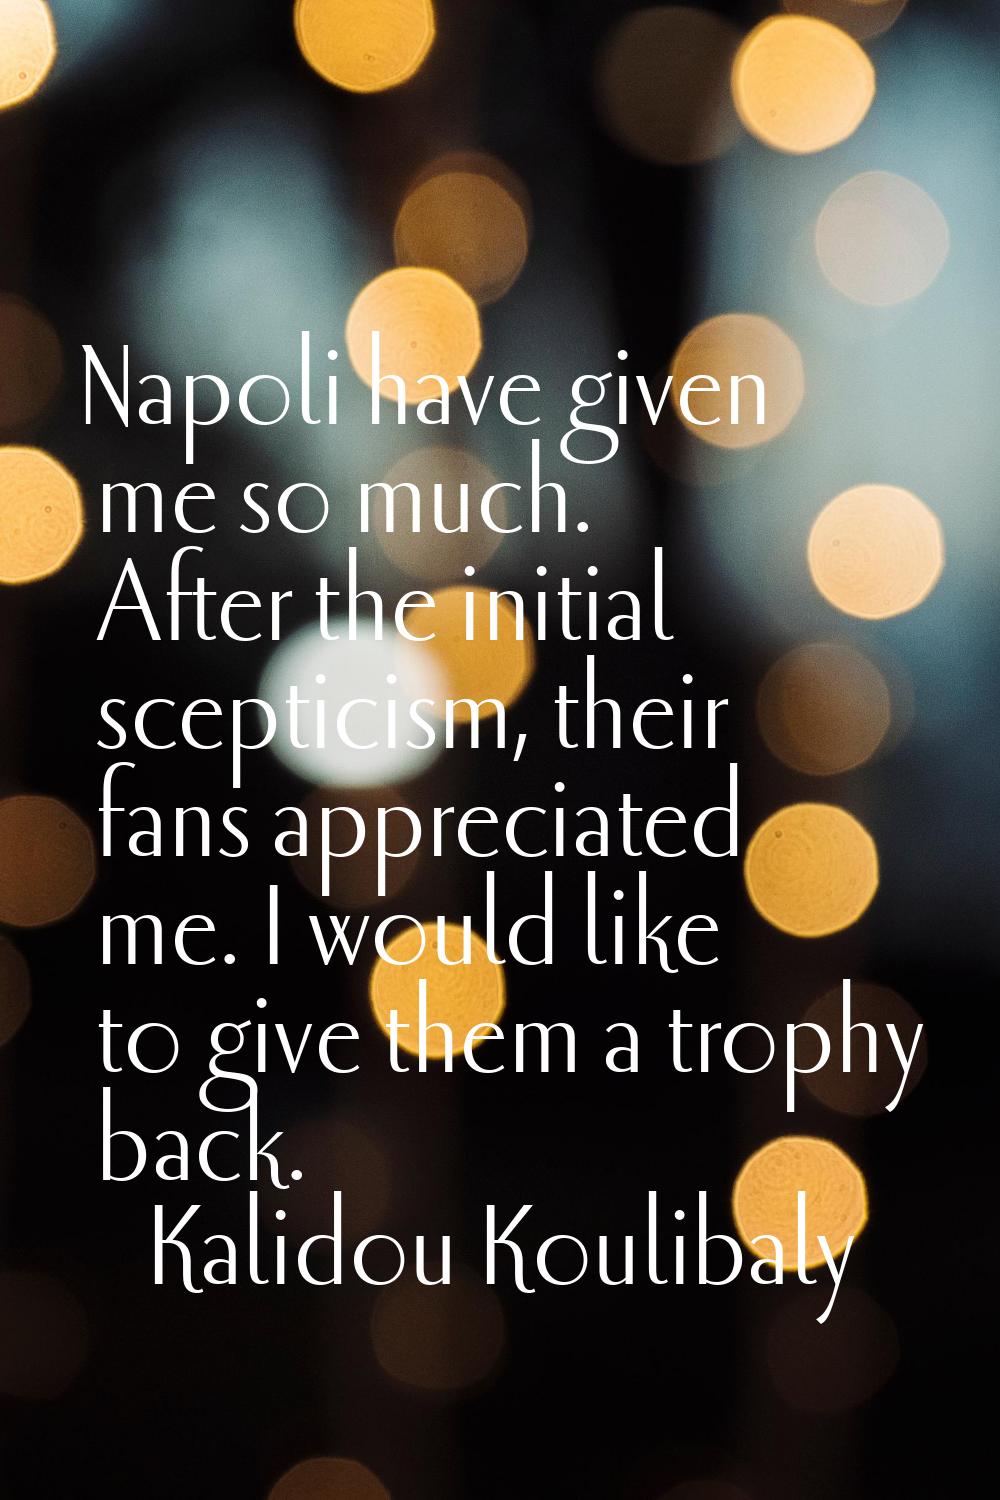 Napoli have given me so much. After the initial scepticism, their fans appreciated me. I would like